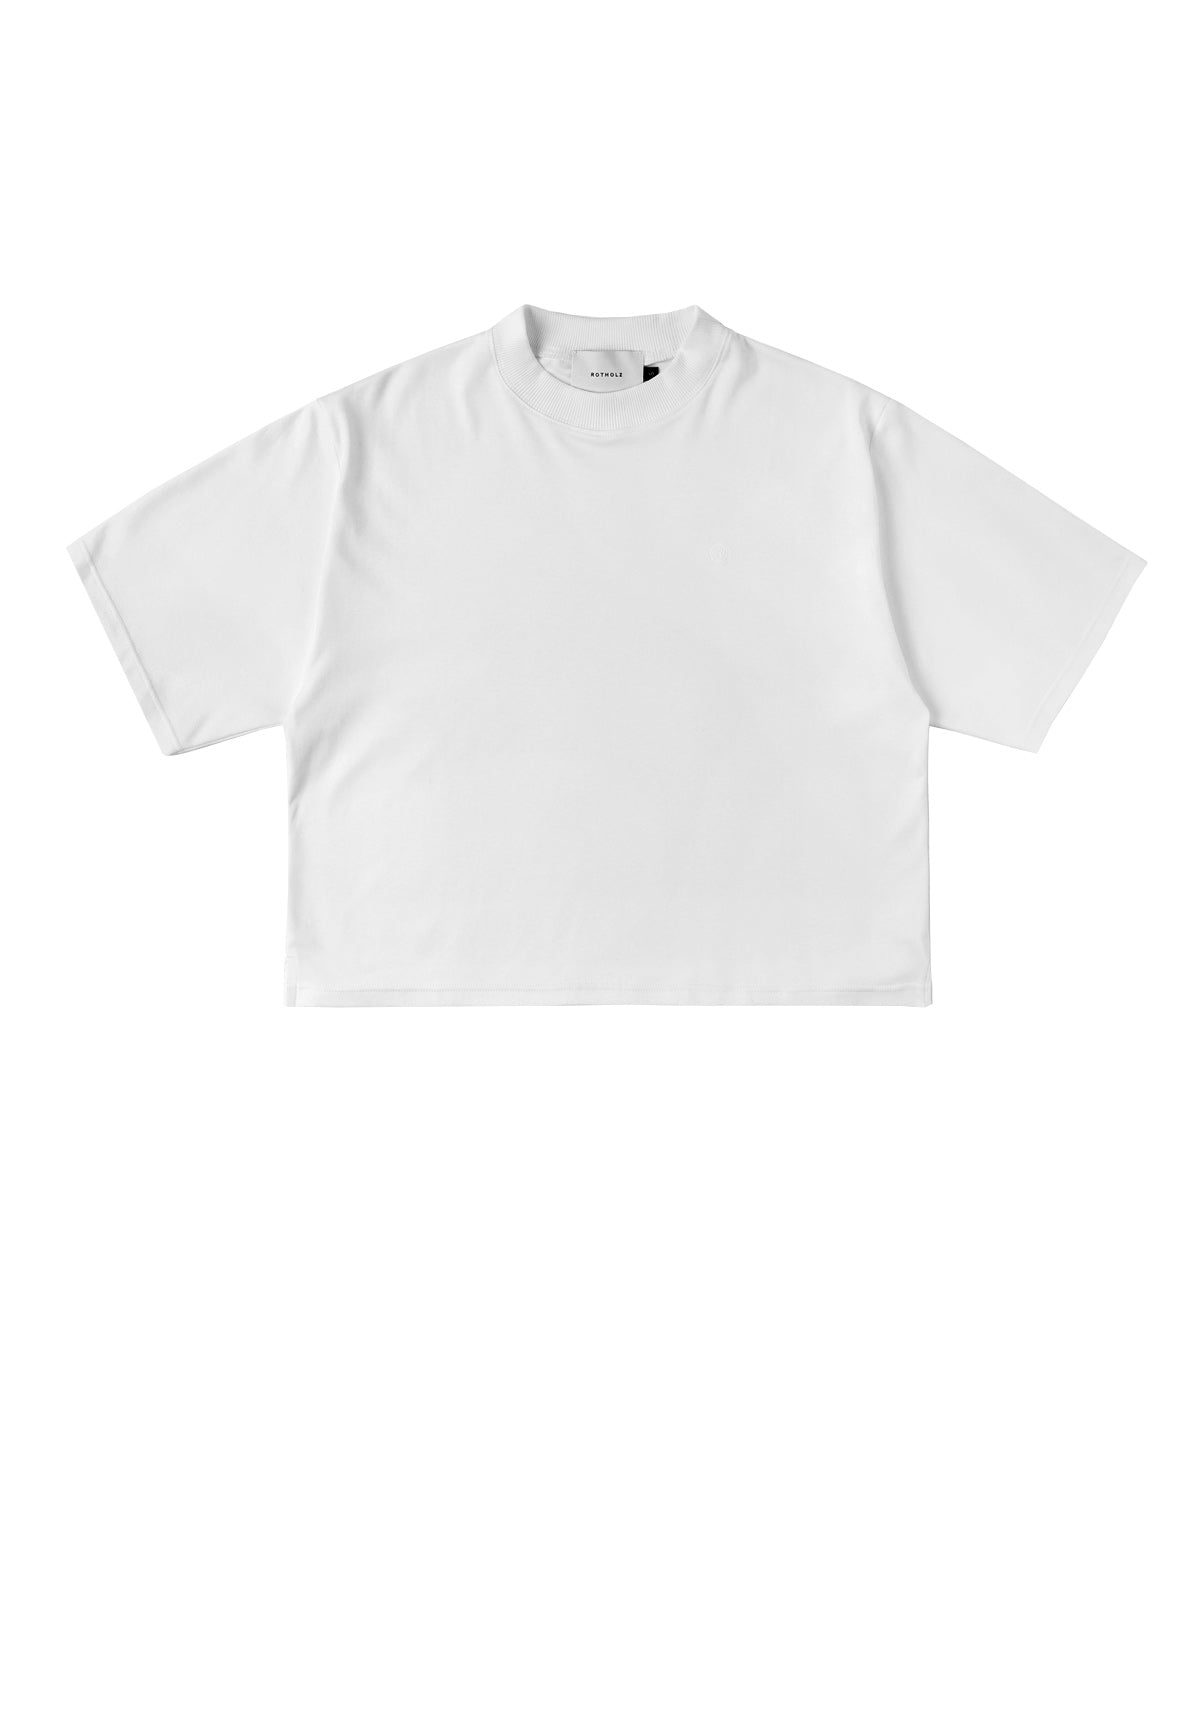 CROPPED RIGHTS T-SHIRT WHITE